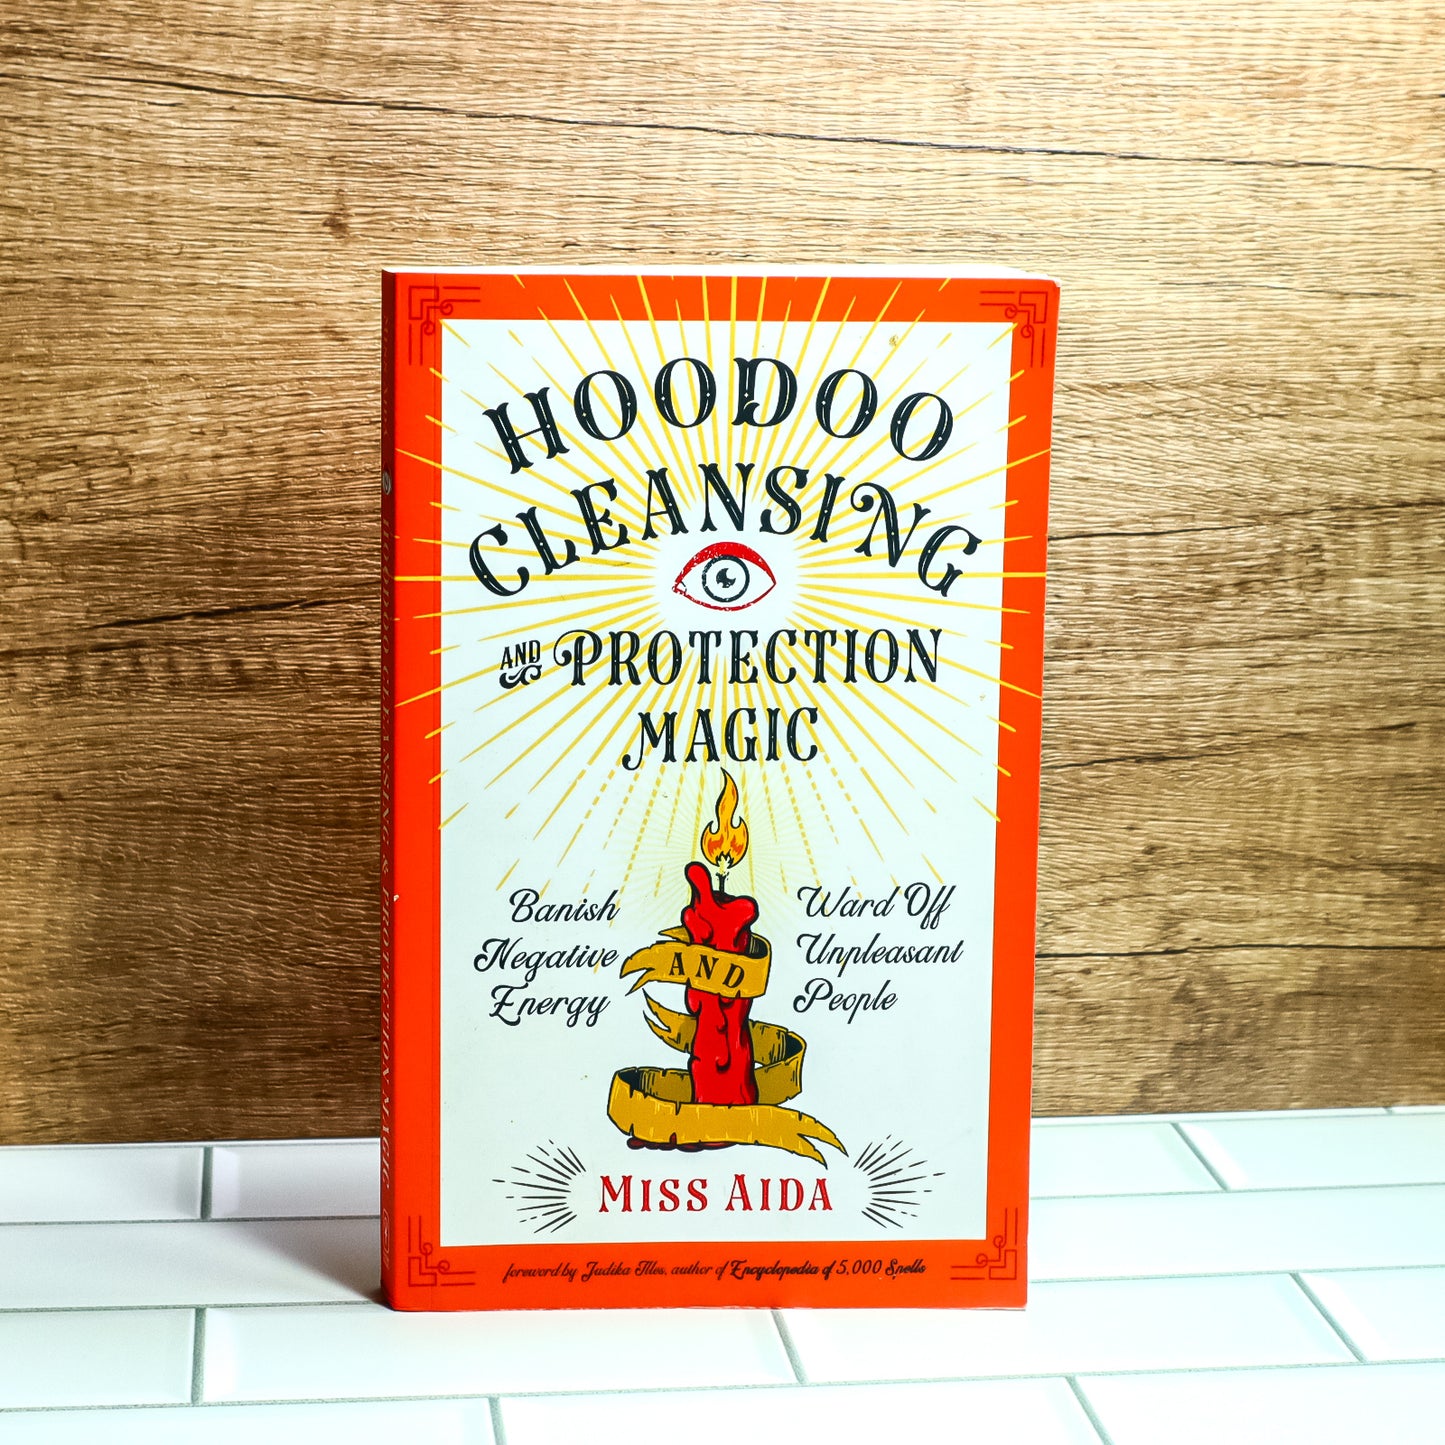 Hoodoo Cleansing & Protection Magic Used Book